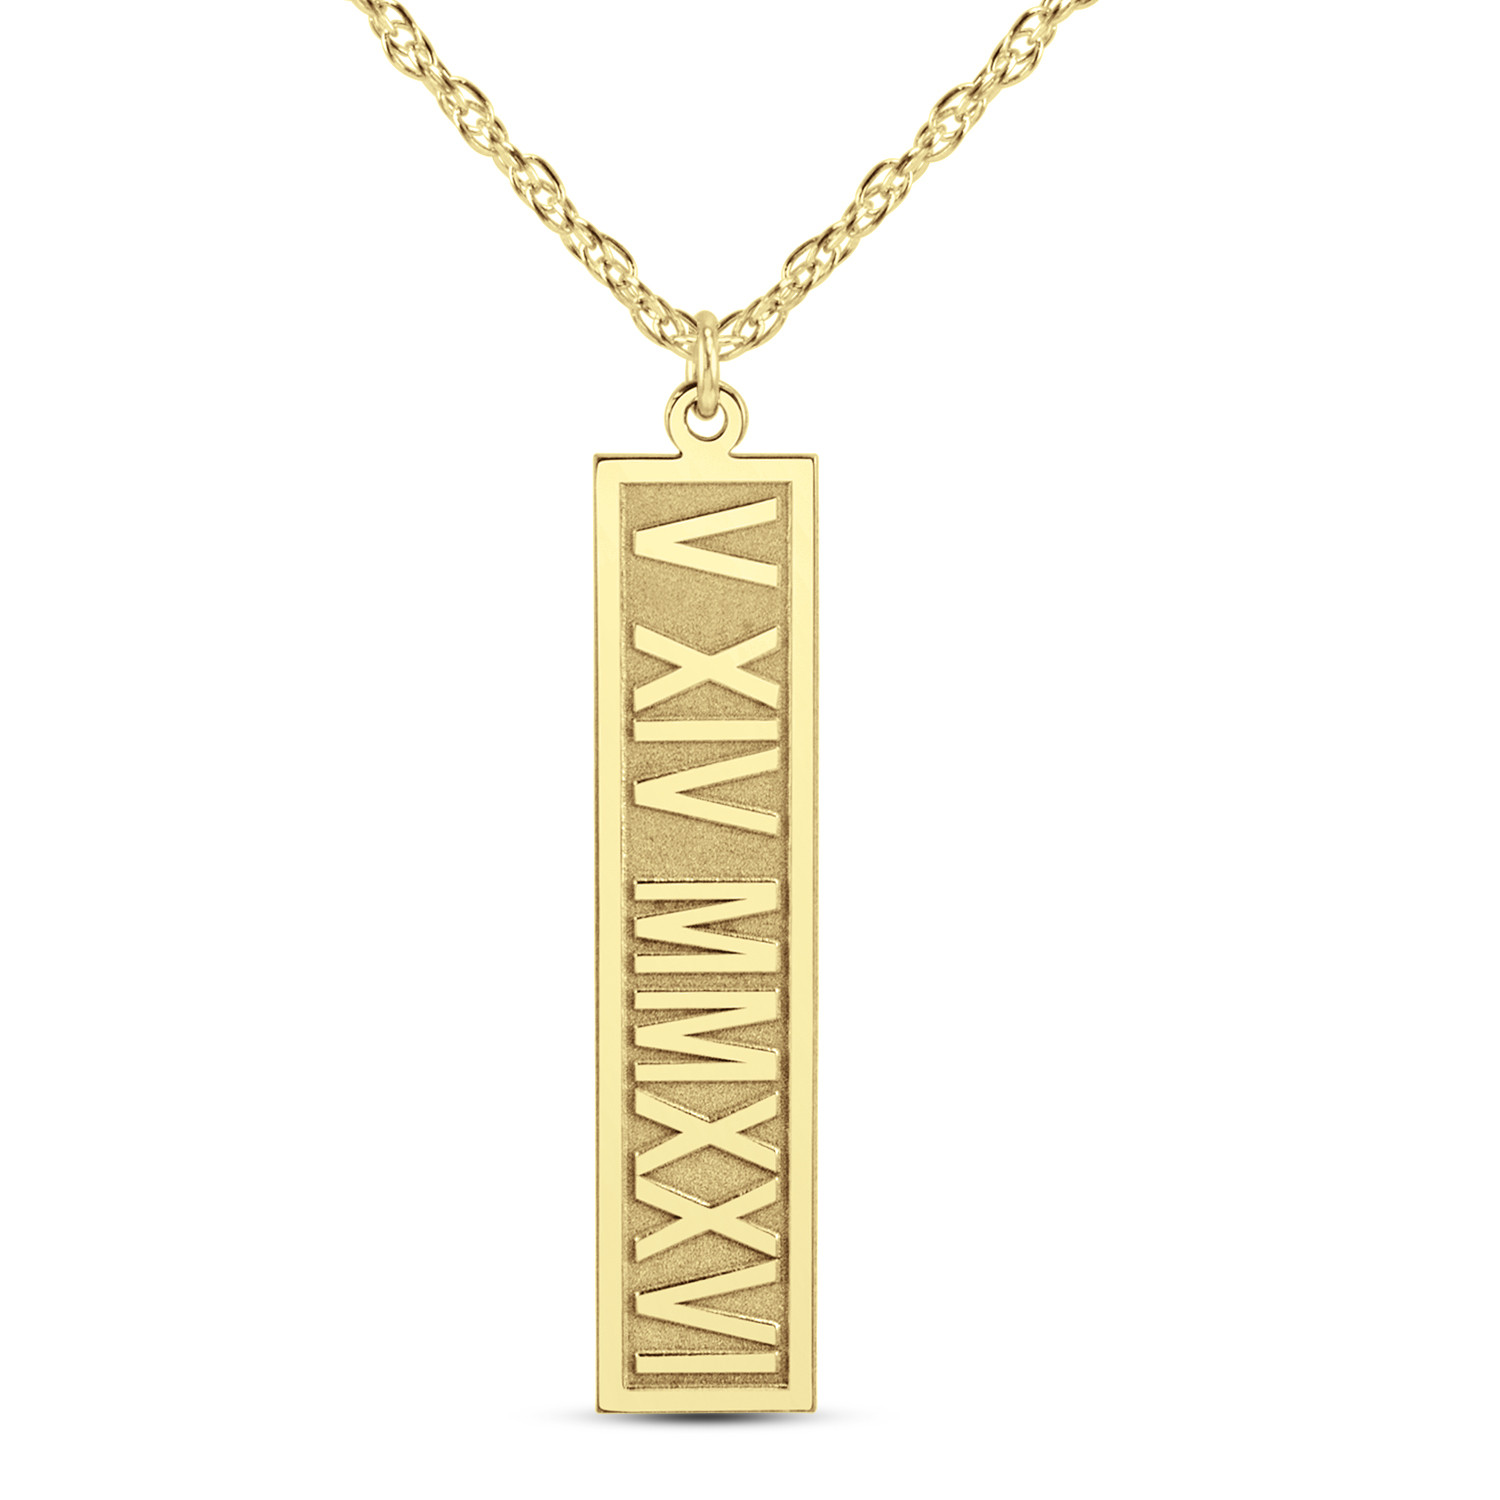 Horizontal Gold Bar Date Necklace - Roman Numeral Date Necklace - Nadin Art  Design - Personalized Jewelry